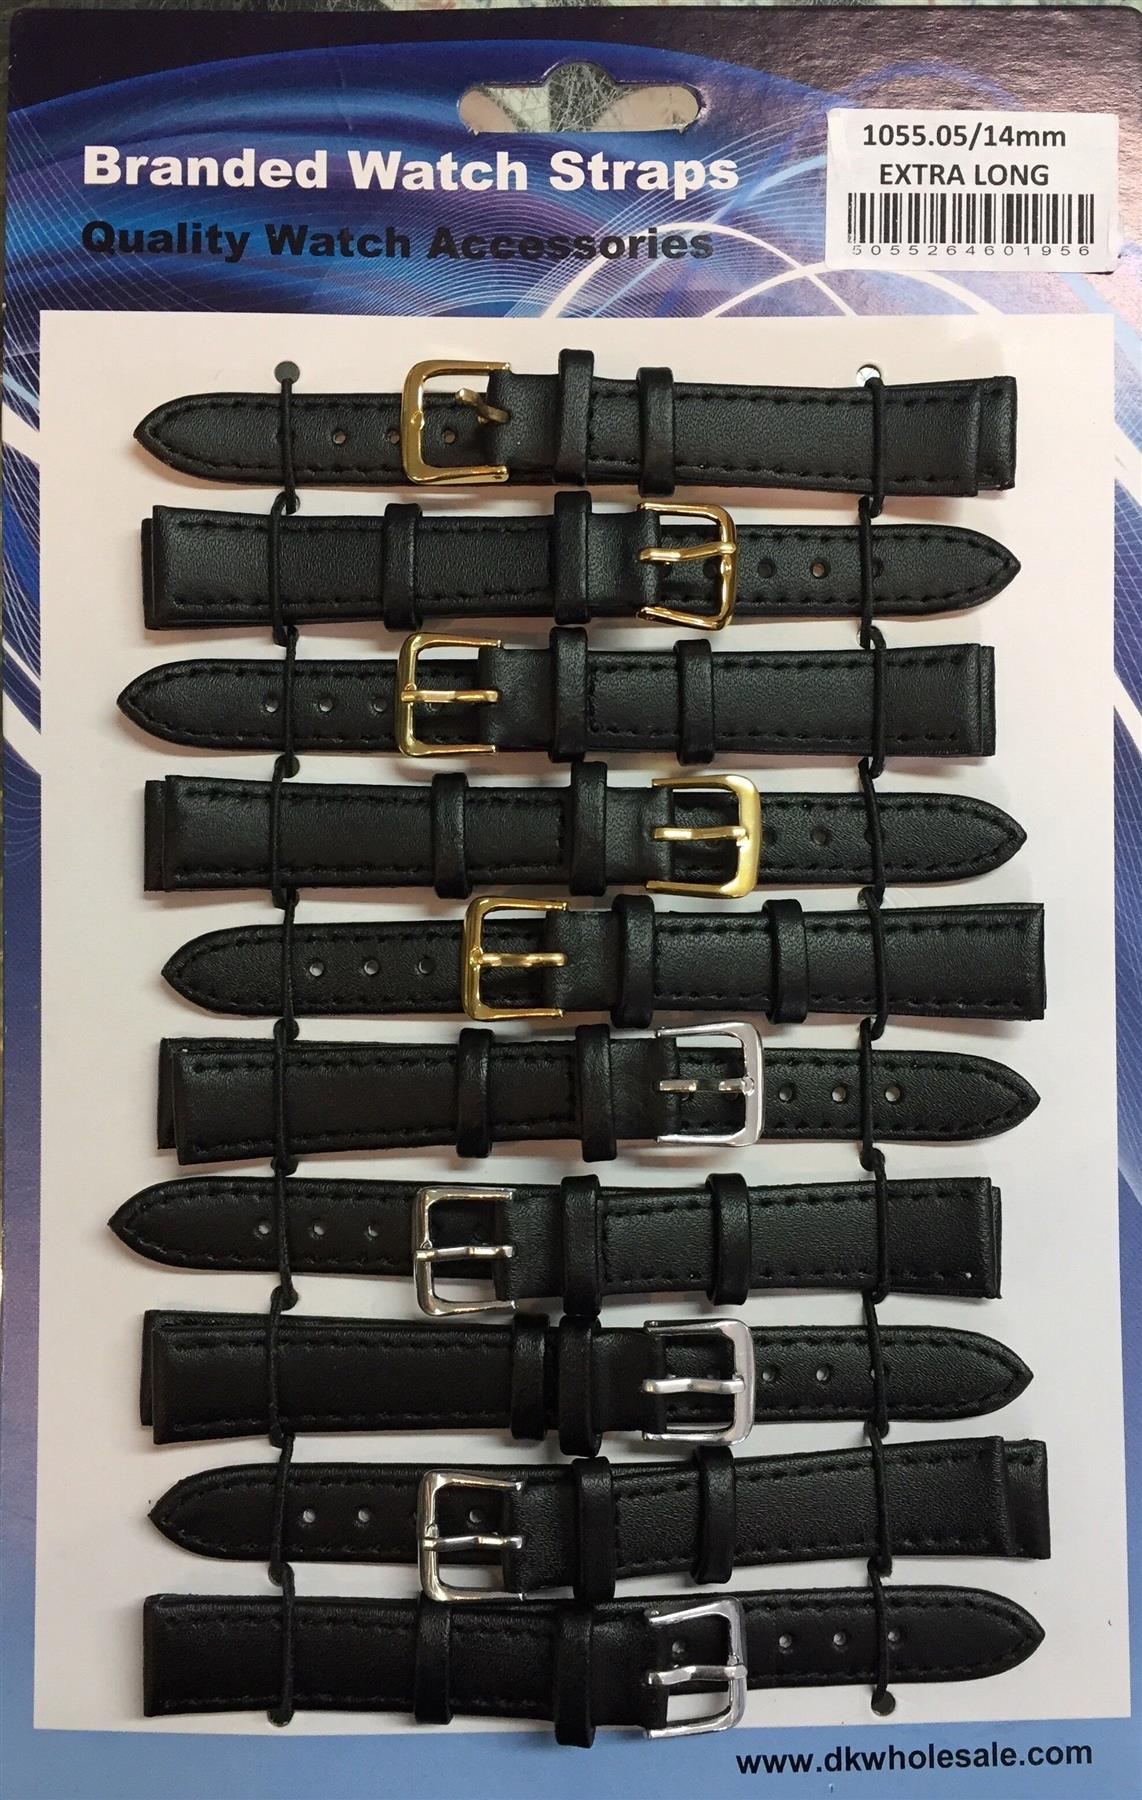 Leather Black Extra Long Watch Straps Pk10 Available sizes 10mm To 24mm 1055.05